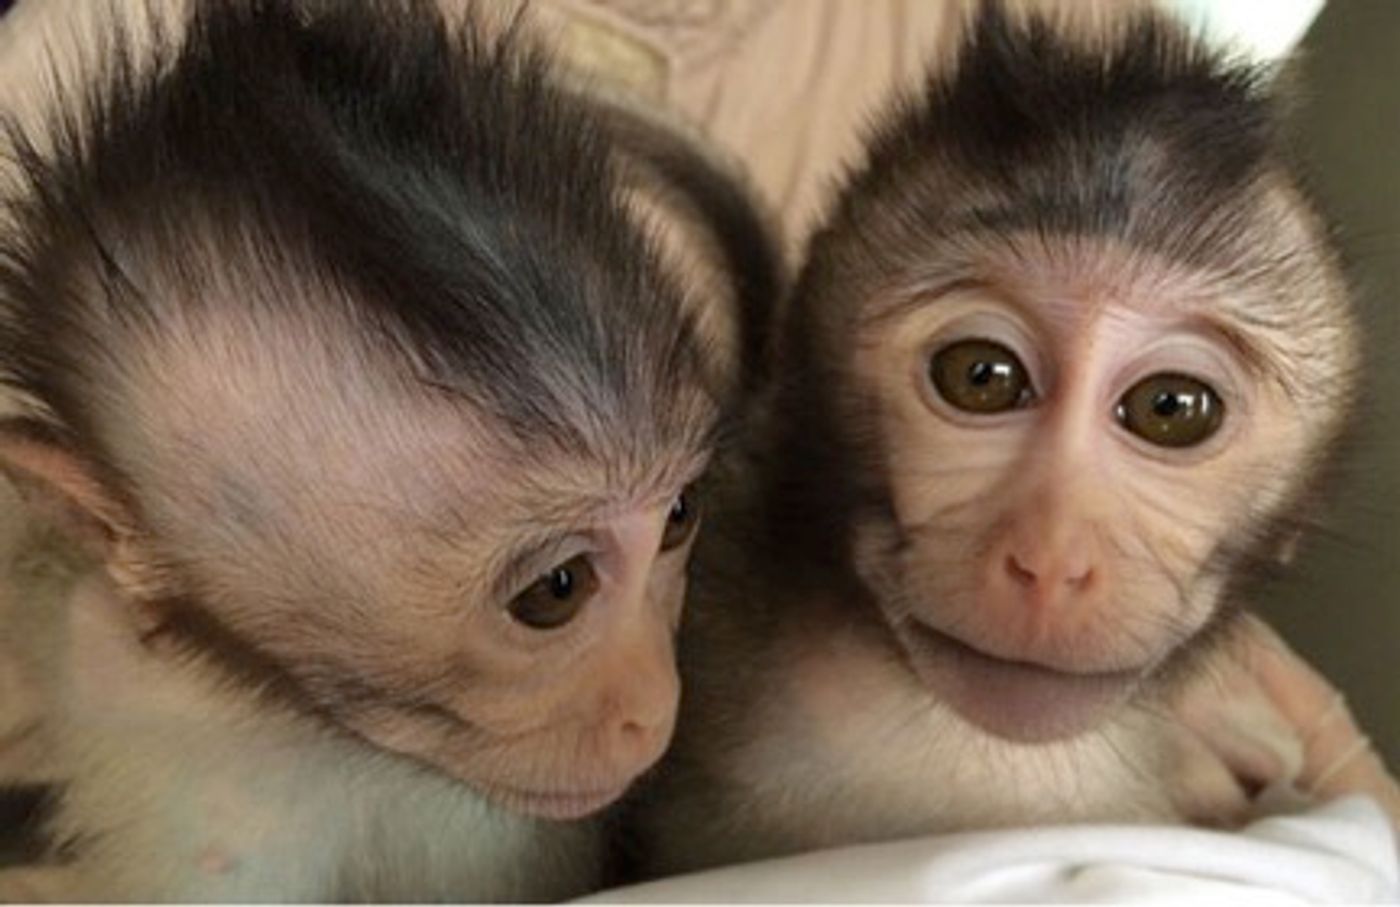 Macaque monkeys with extra copies of MECP2 gene show autism-like behaviors.